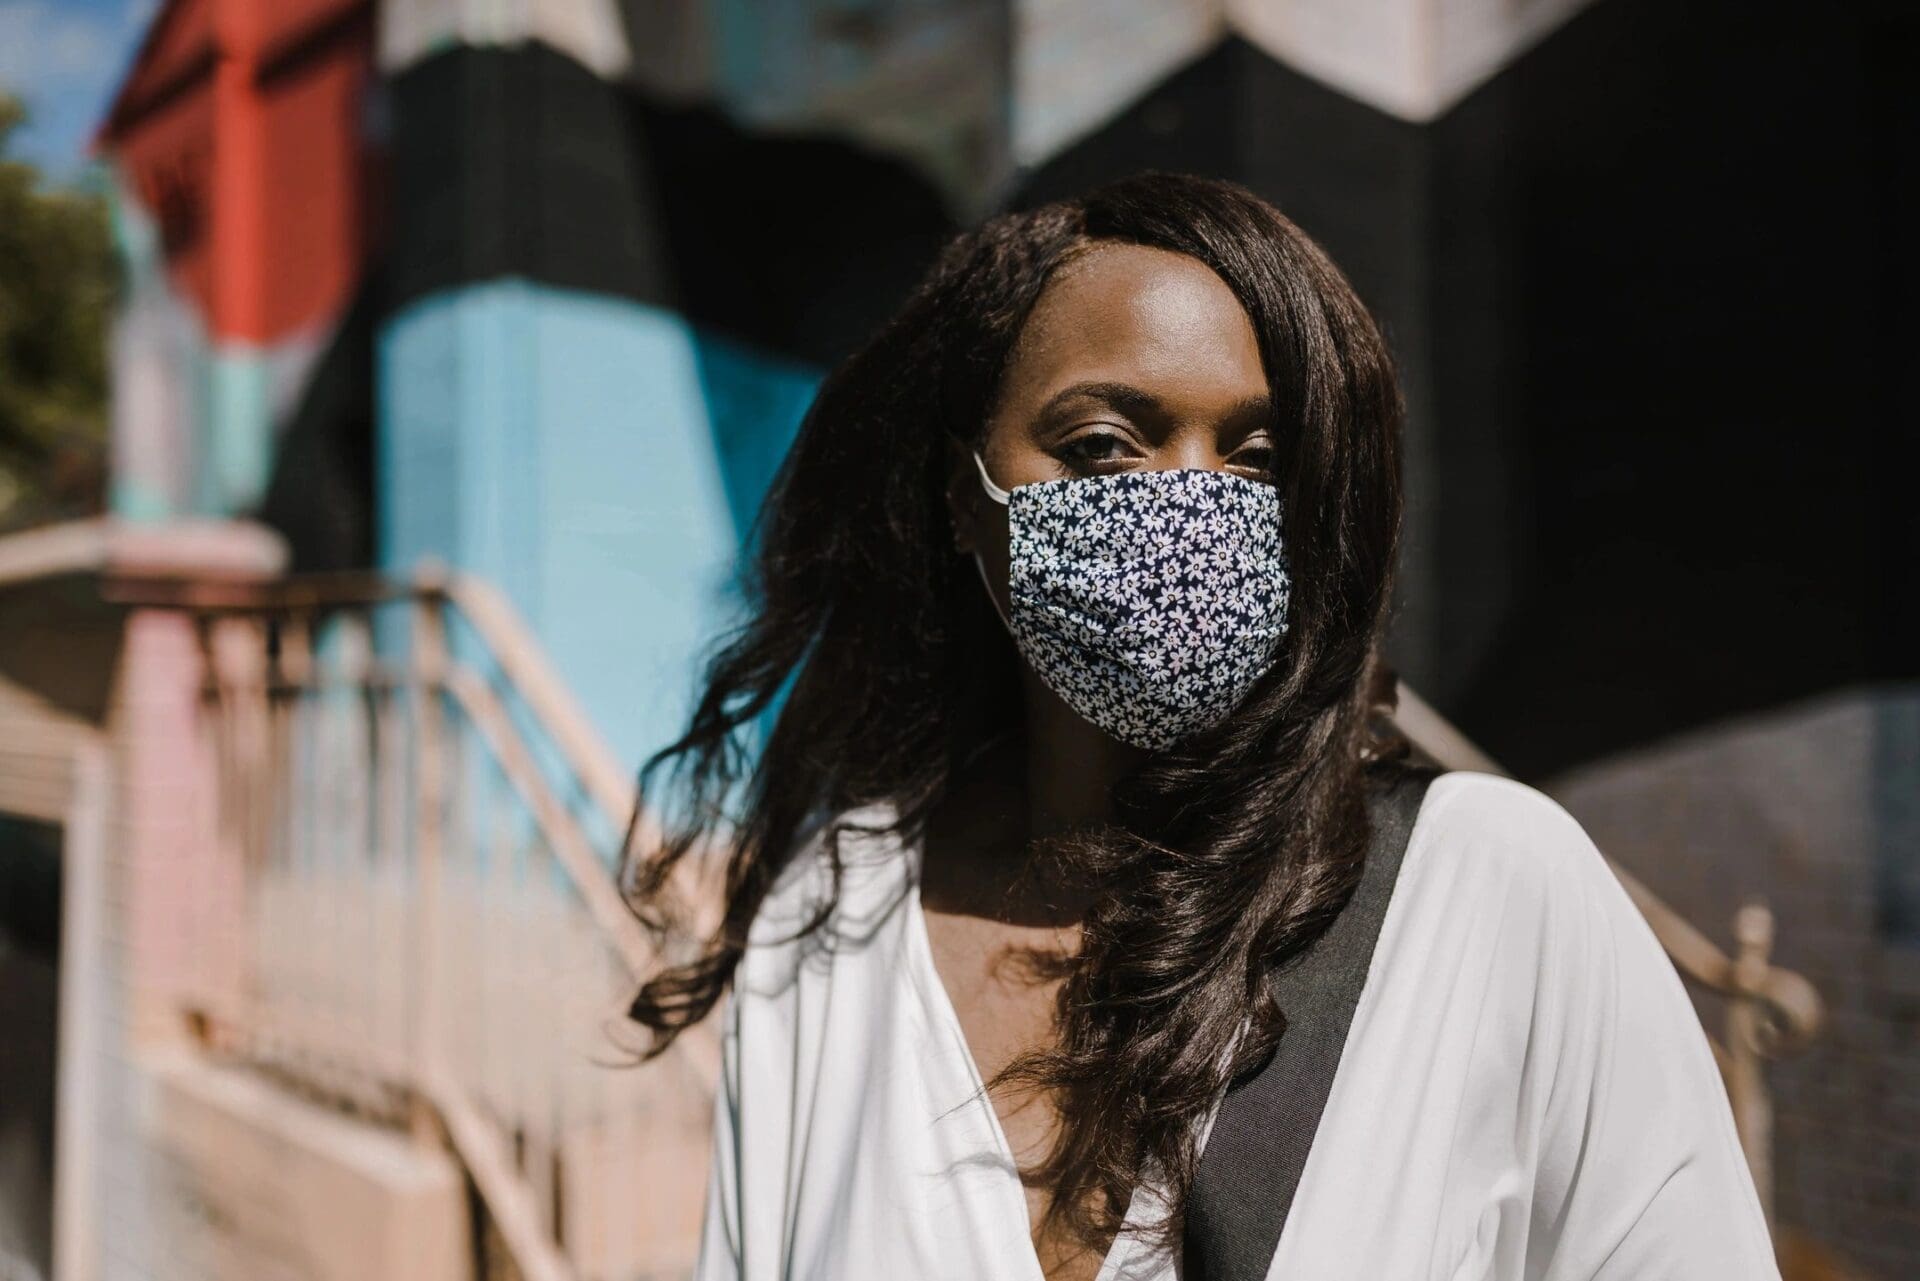 A woman wearing a face mask in front of a building.